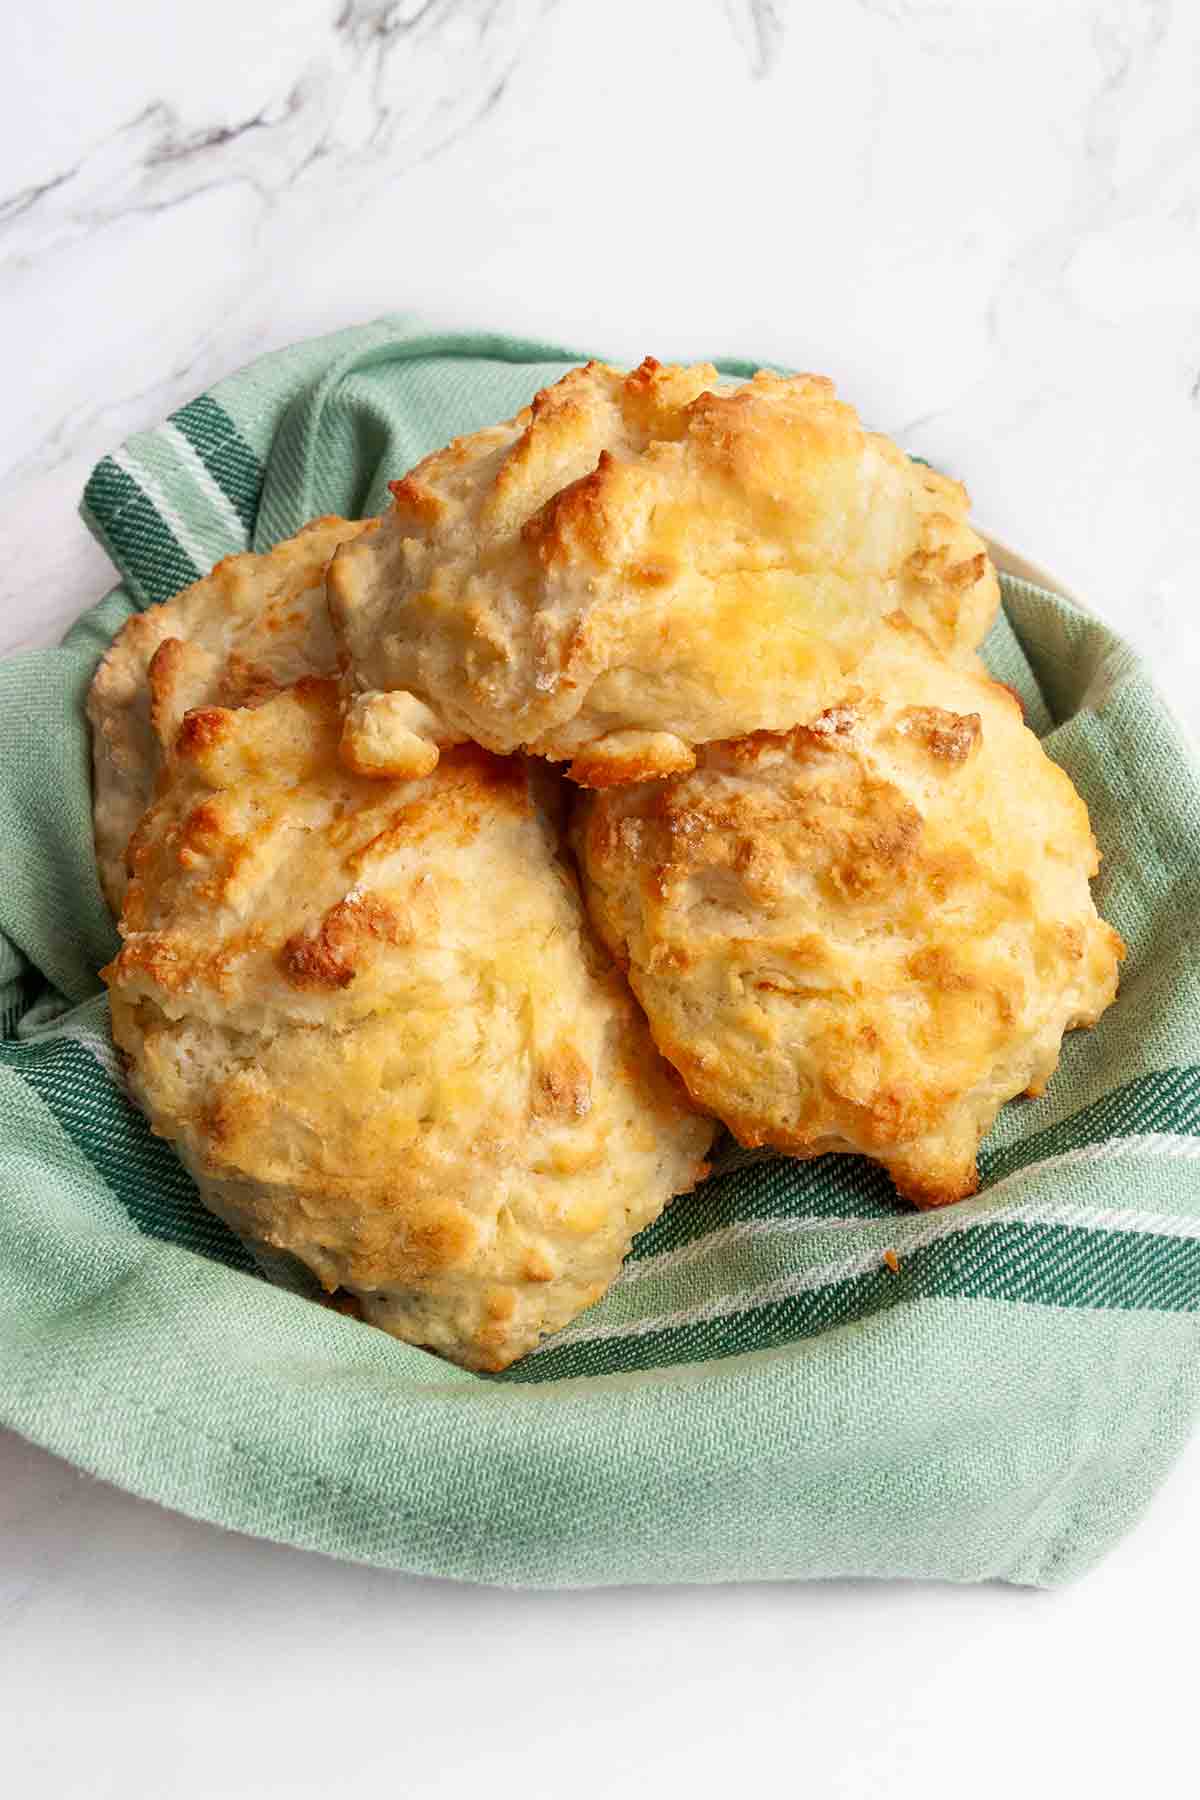 Four buttermilk drop biscuits in a bowl lined with a striped green kitchen towel.